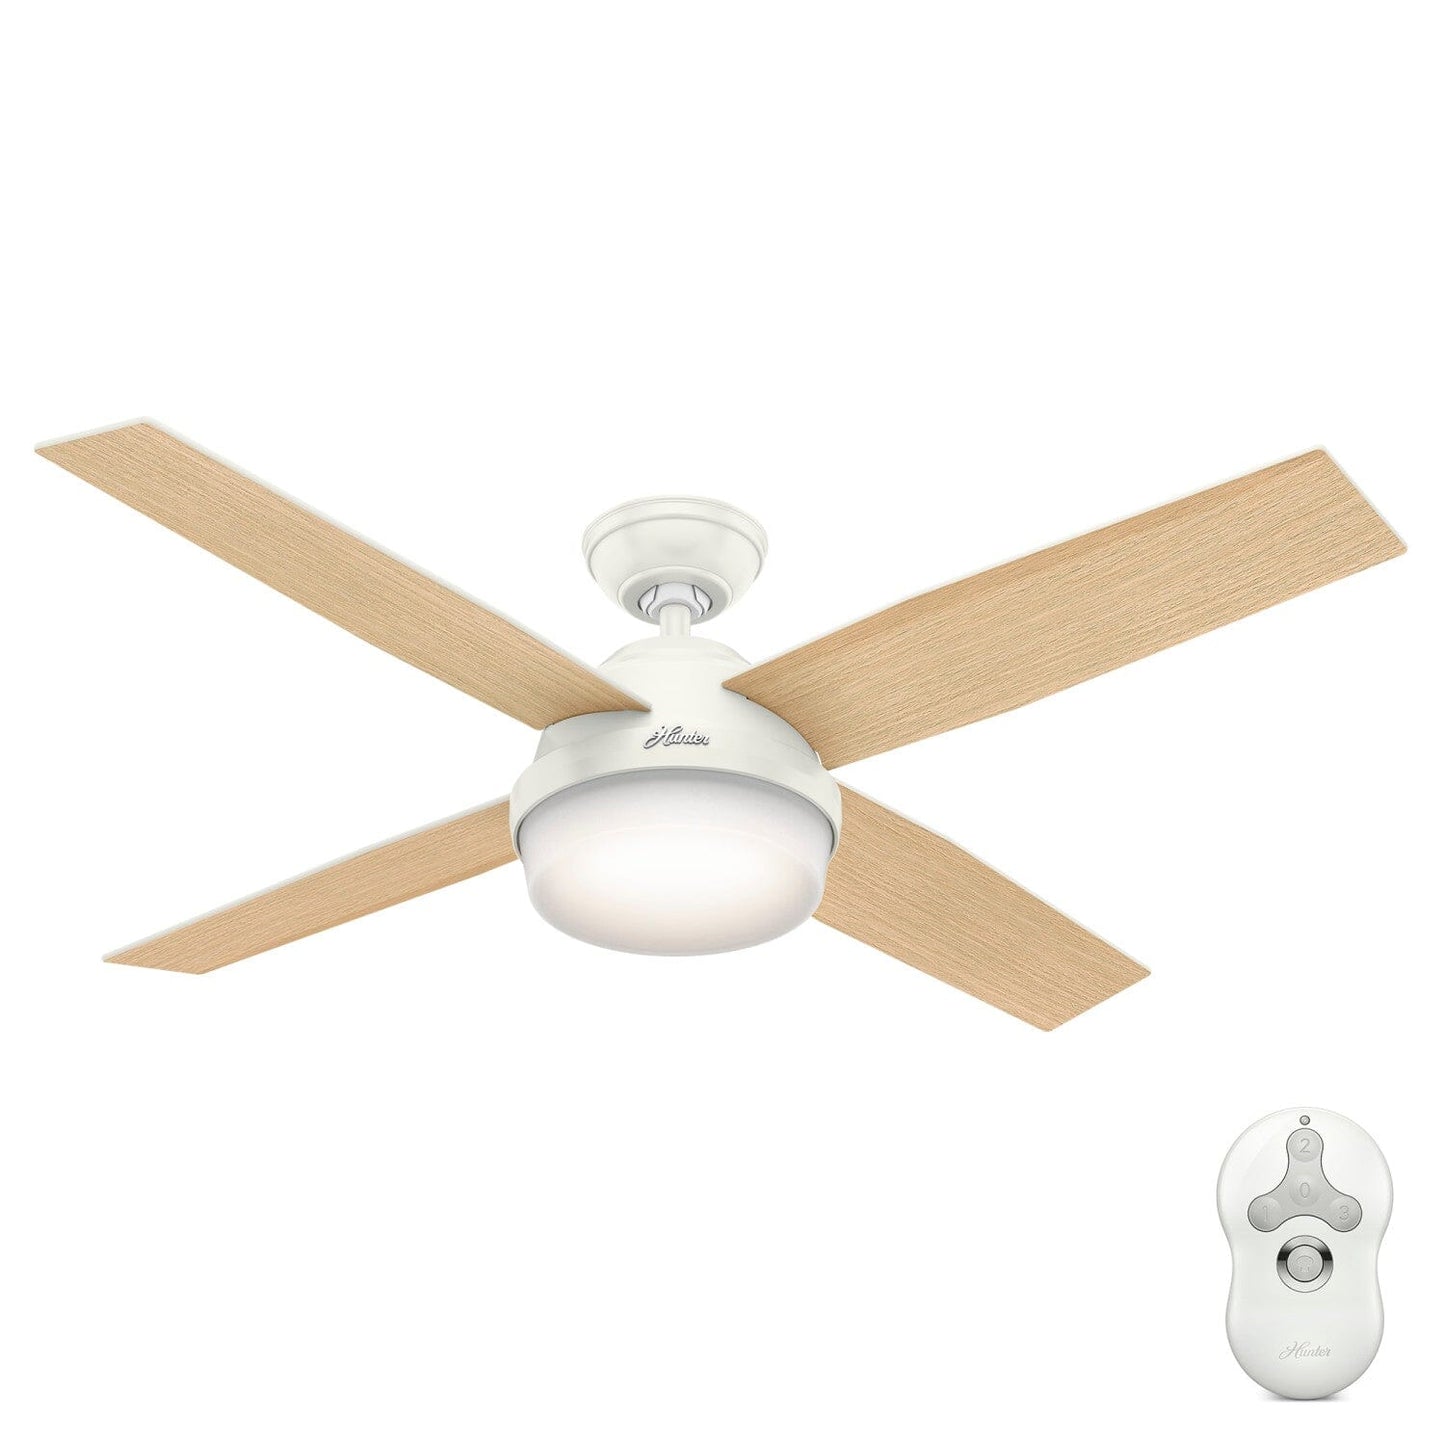 Dempsey with Light 52 inch Ceiling Fans Hunter Fresh White - Blonde Oak 